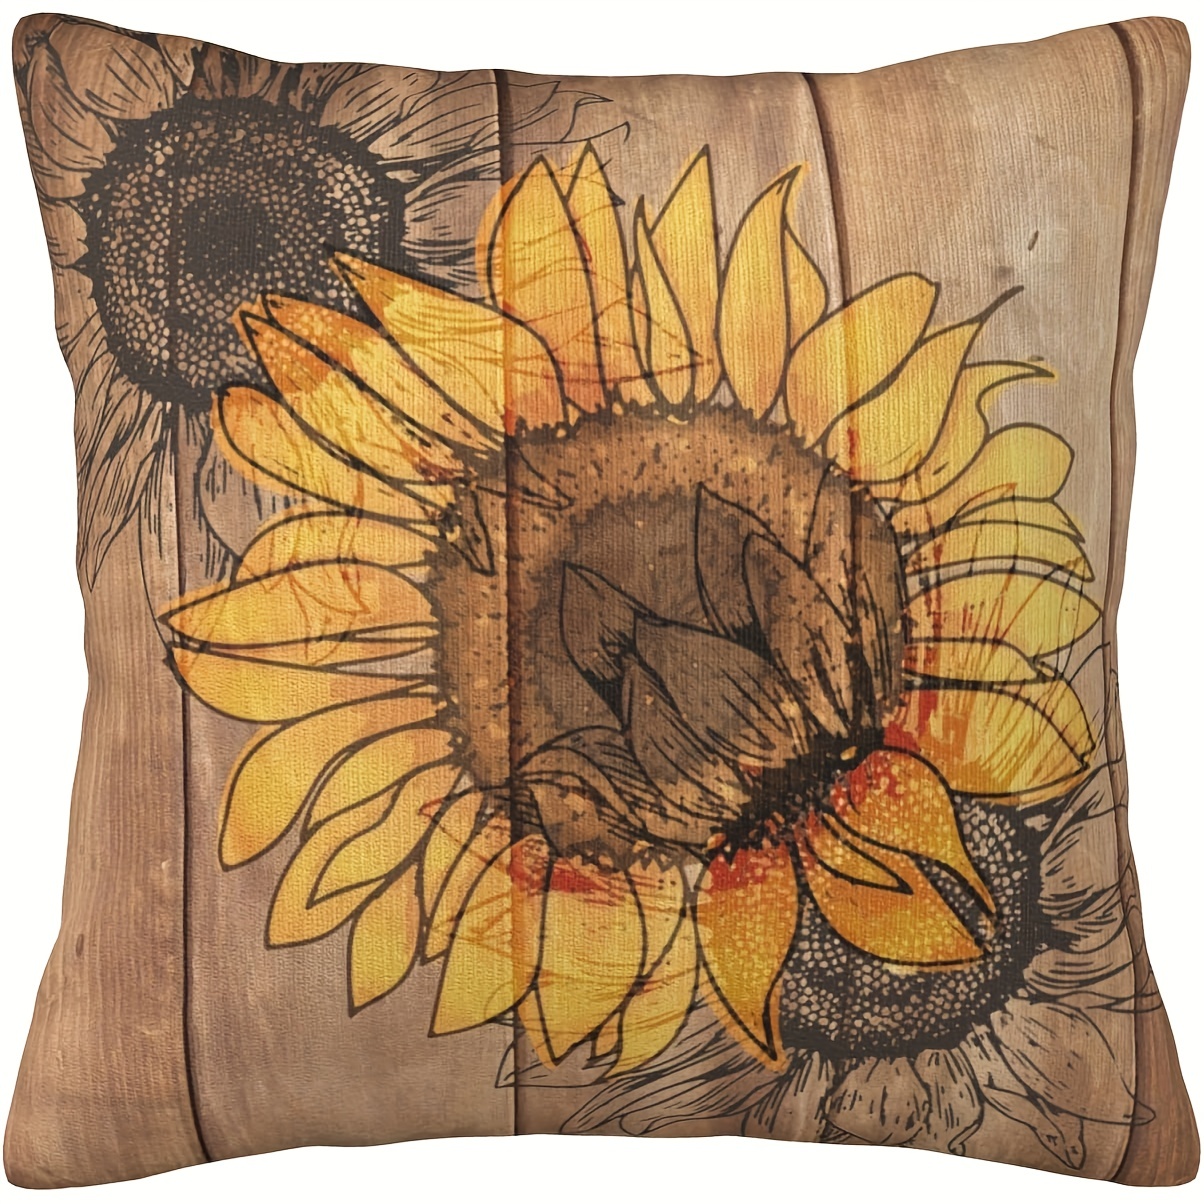 Set of 4 Pillow Covers 18x18, Country Sunflowers Farmhouse Cotton Linen  Fabric, Retro Yellow Flower with